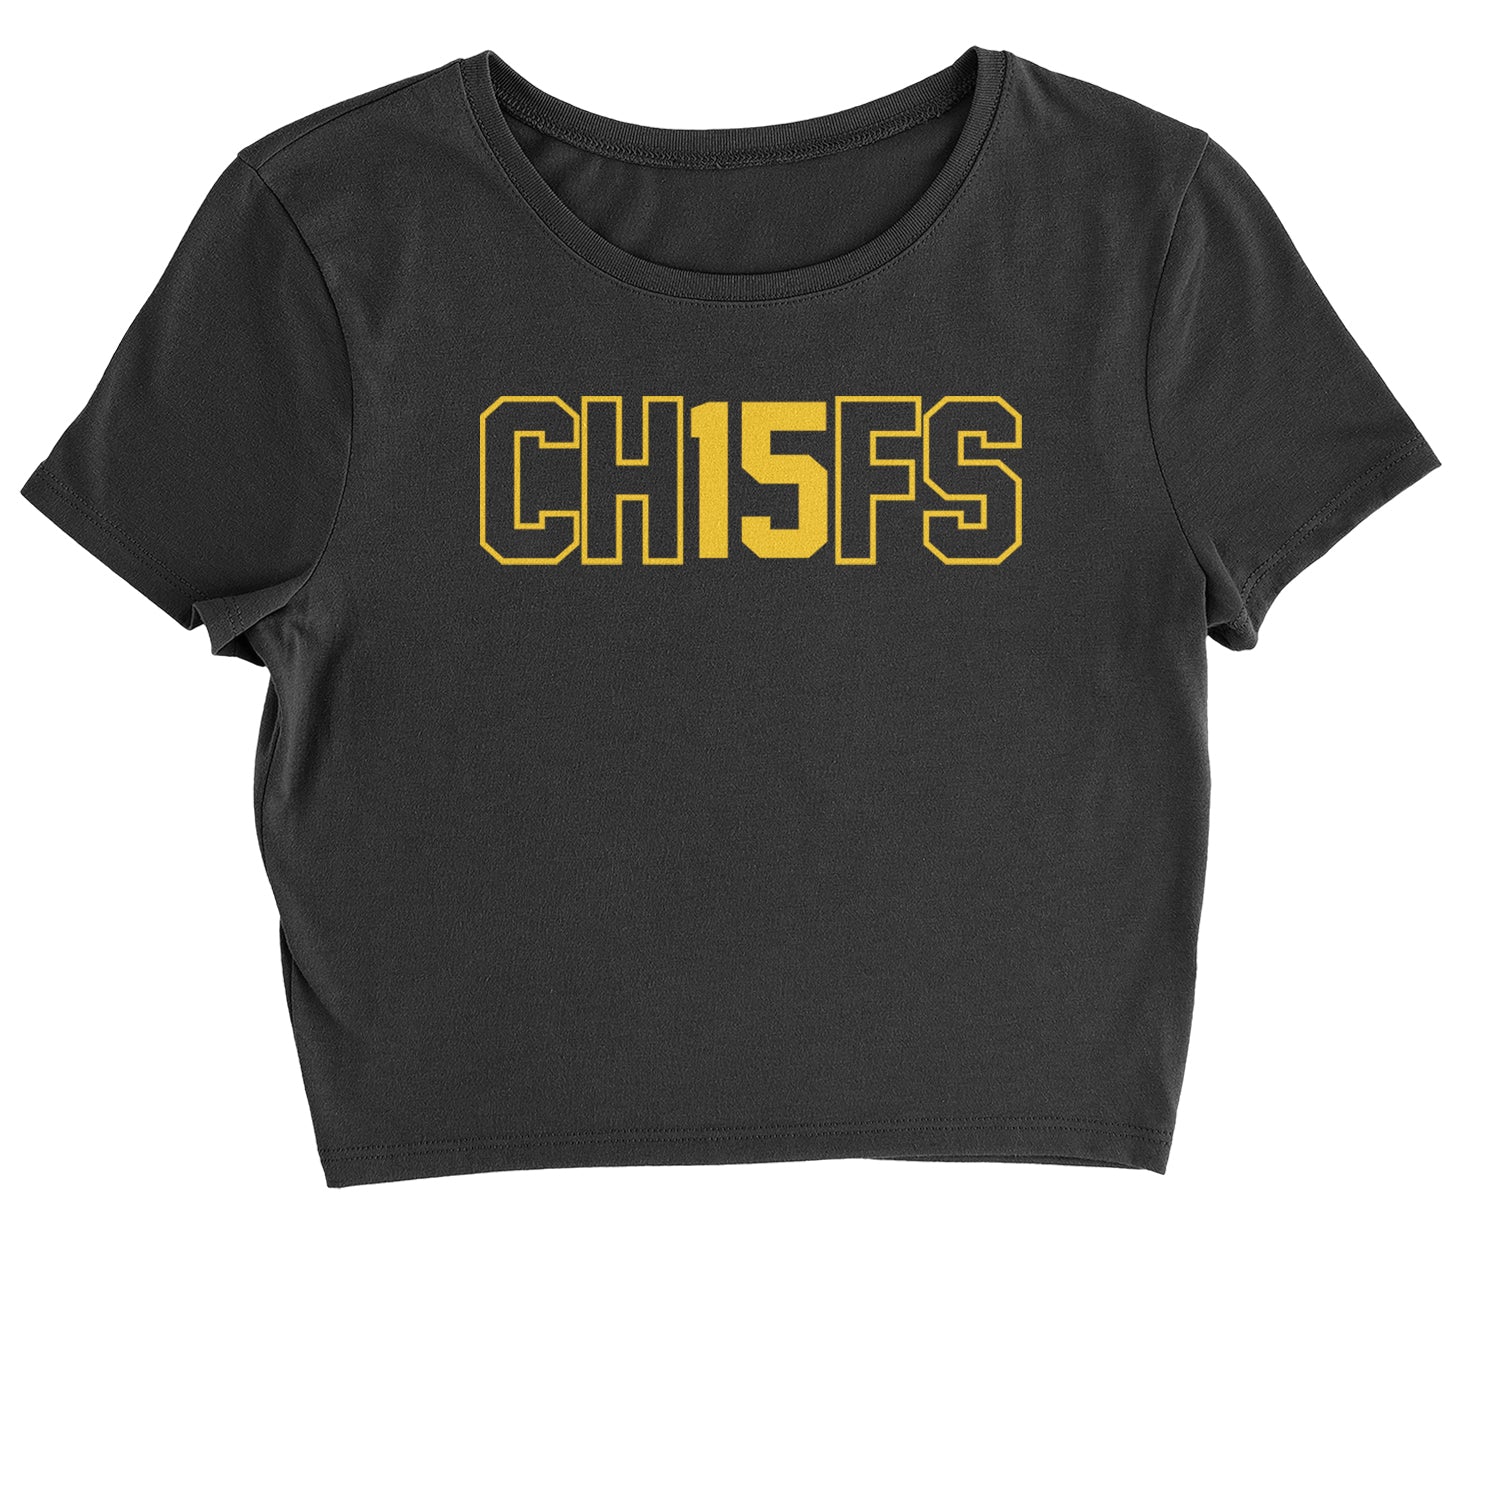 Ch15fs Chief 15 Shirt Cropped T-Shirt ass, big, burrowhead, game, kelce, know, moutha, my, nd, patrick, role, shut, sports, your by Expression Tees